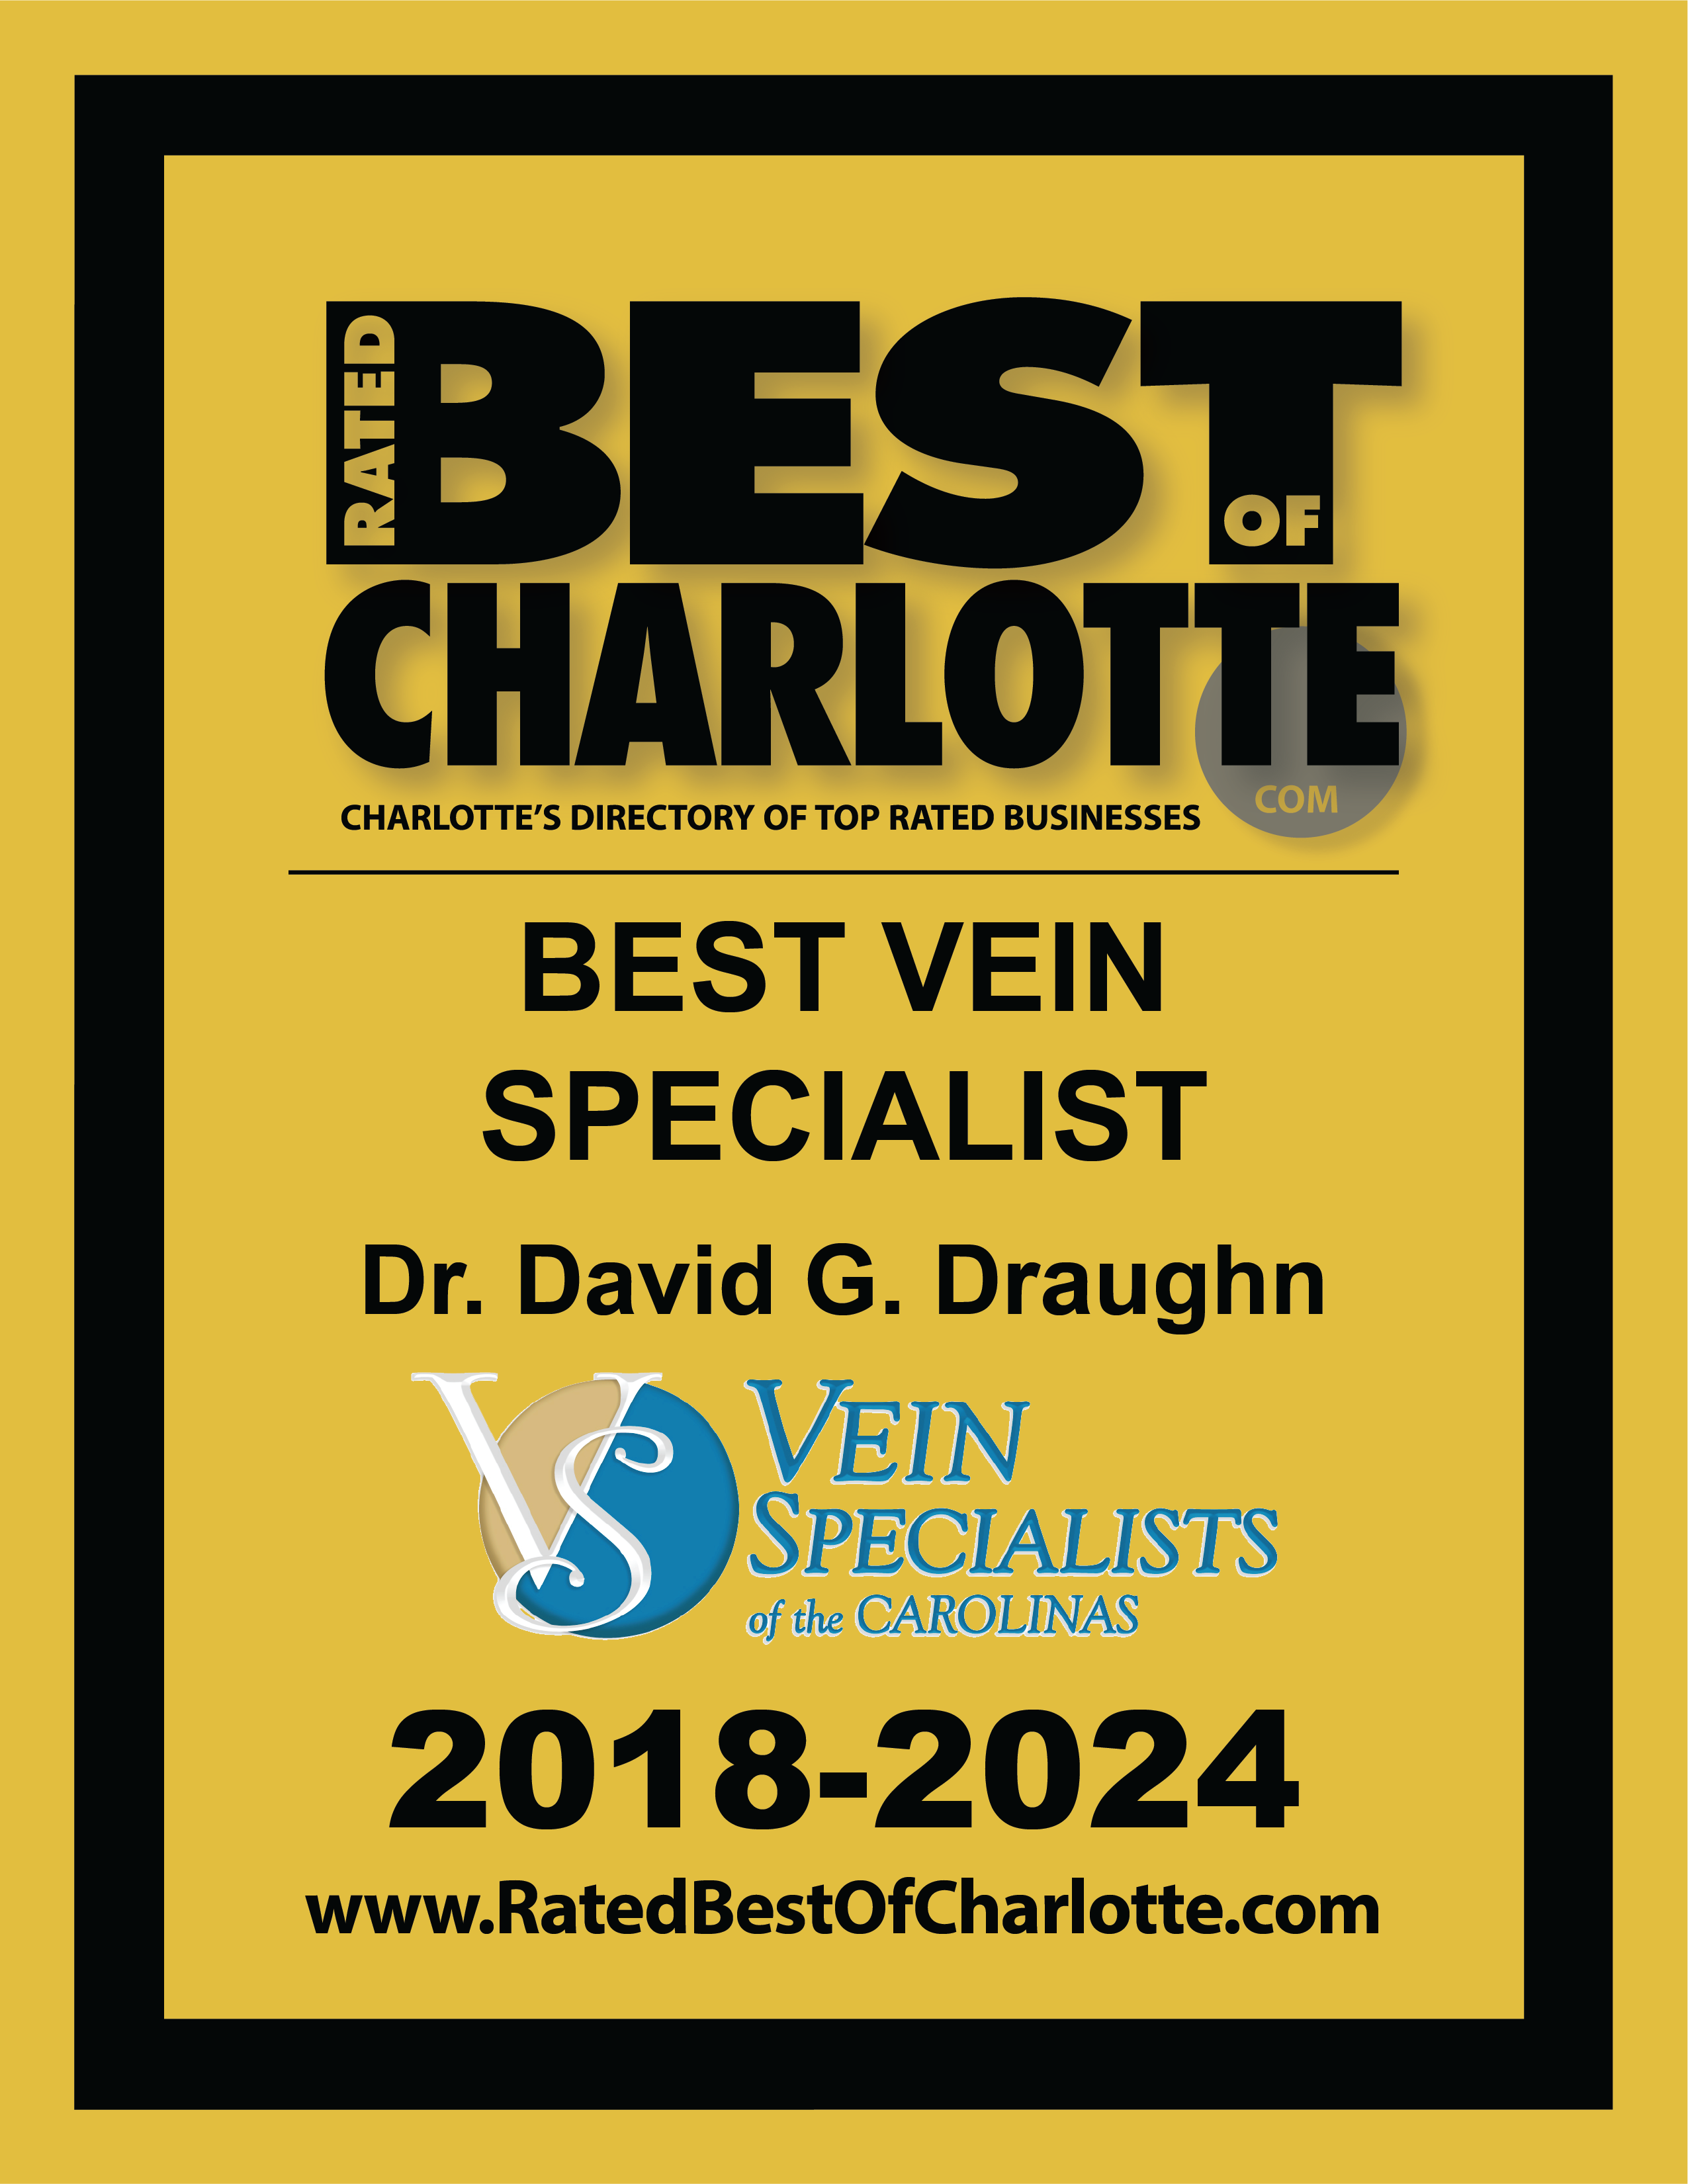 Rated Best of Charlotte Vein Specialist for 6 Years Straight!